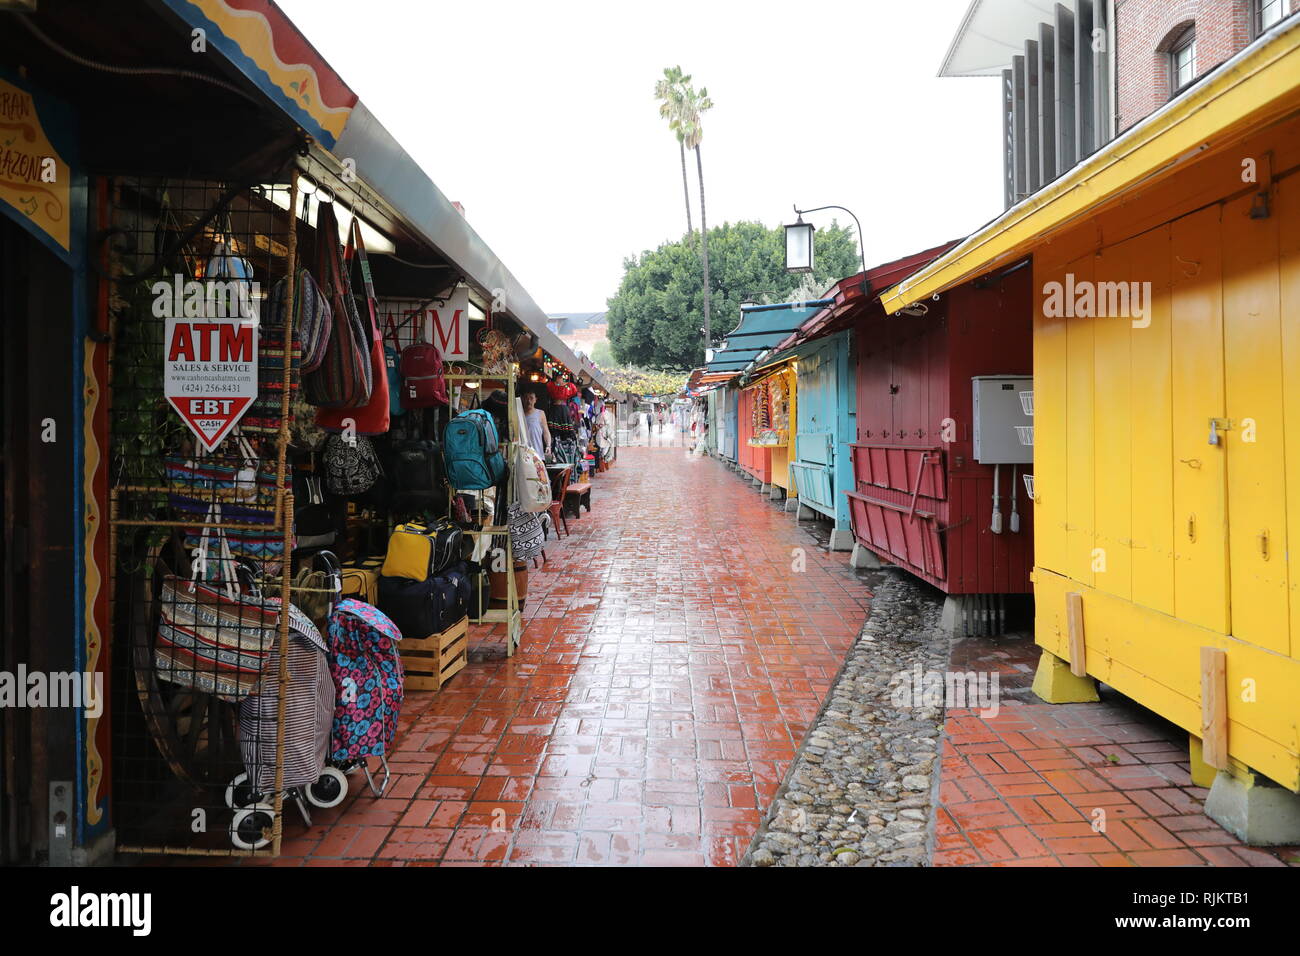 Olvera Street (Calle Olvera or Placita Olvera) is a historic district in downtown Los Angeles. Stock Photo